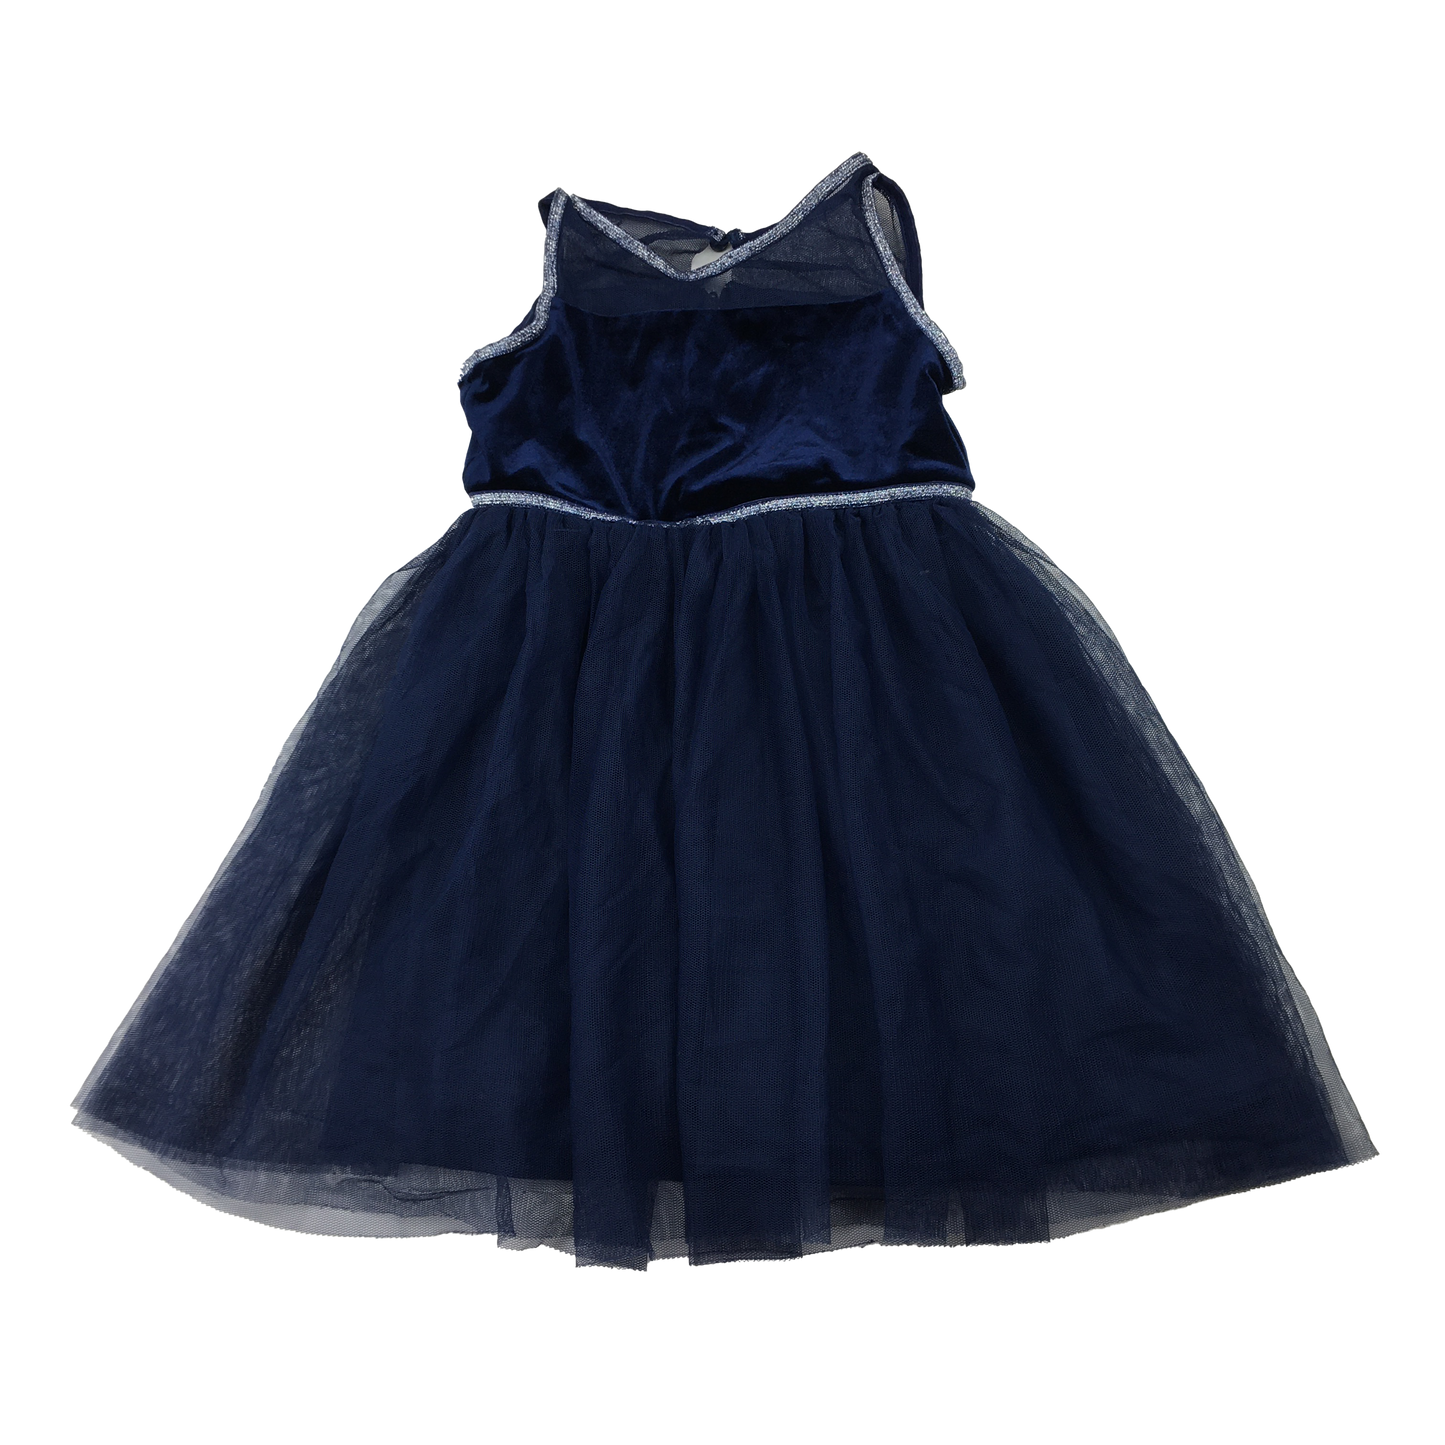 Ava & Yelly Navy Dress with Tulle Skirt 4